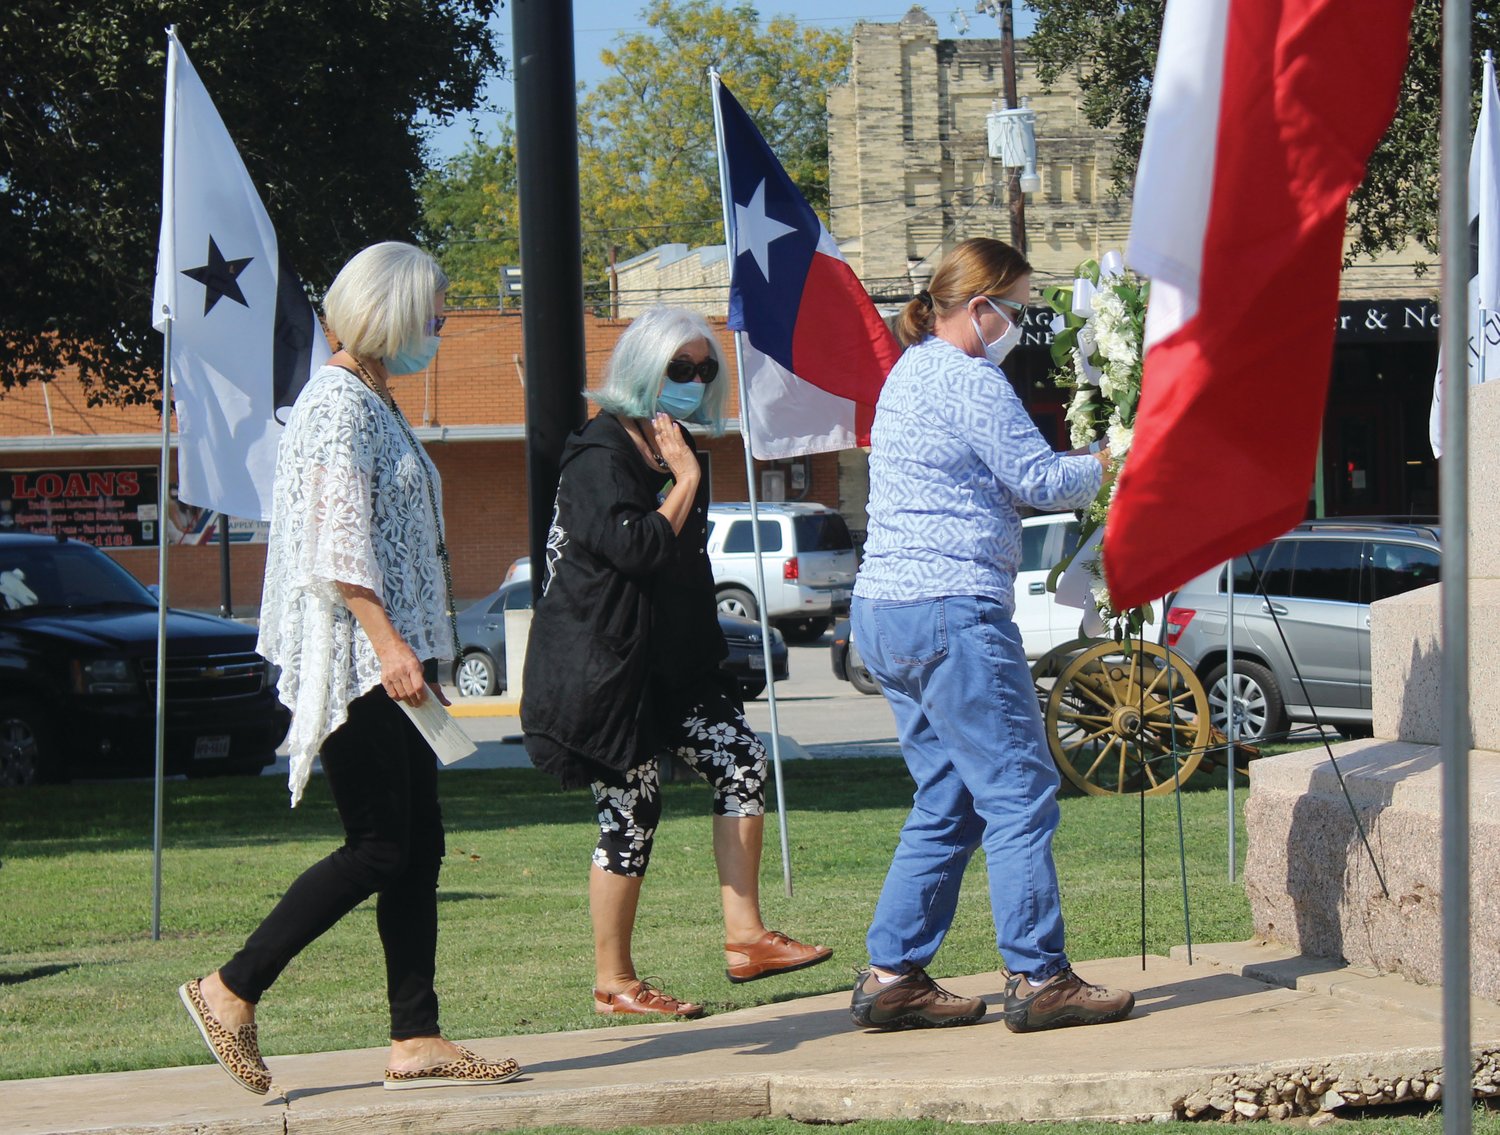 Members of the Daughters of the Republic of Texas placed a memorial wreath at the base of the monument in Texas Heroes square in October. The Gonzales Economic Development Corporation has hired a company to help repair the flags that fly in Texas Heroes Square.